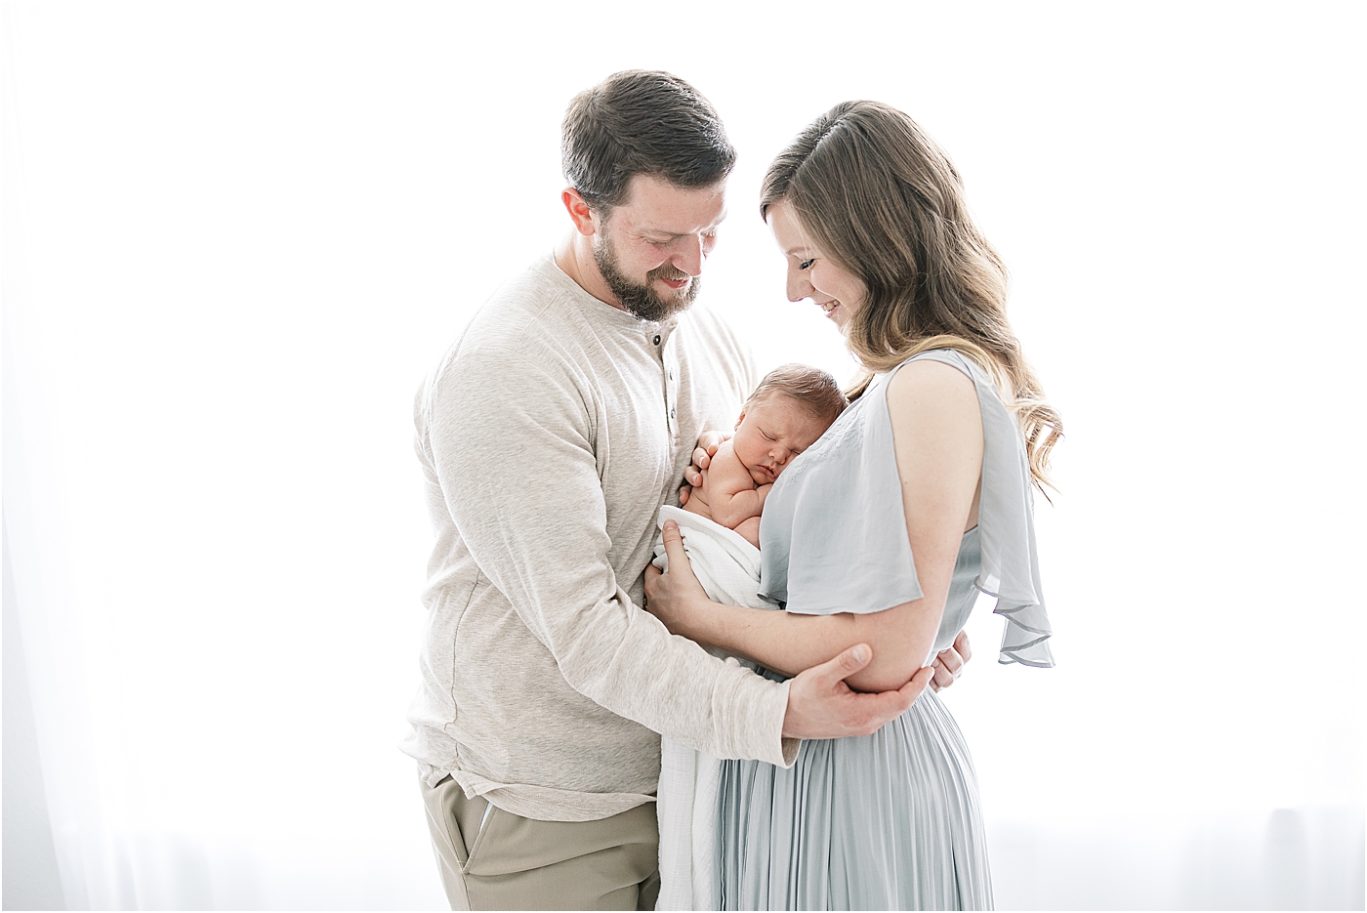 Backlit photo of new parents holding their baby boy in studio for newborn photos. Photo by Lindsay Konopa Photography.